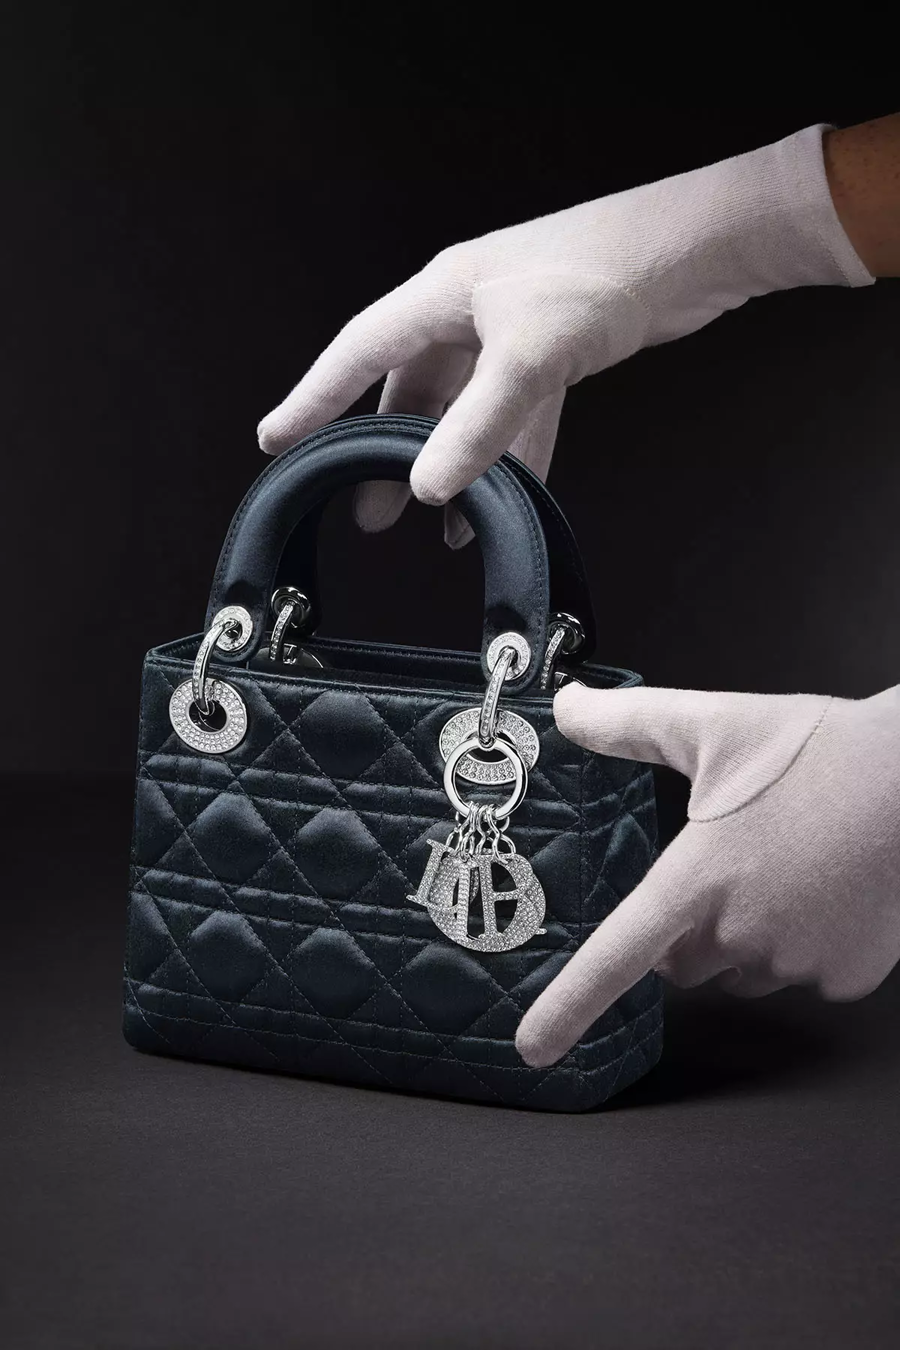 THE ICONIC LADY DIOR  Bags  DIOR US